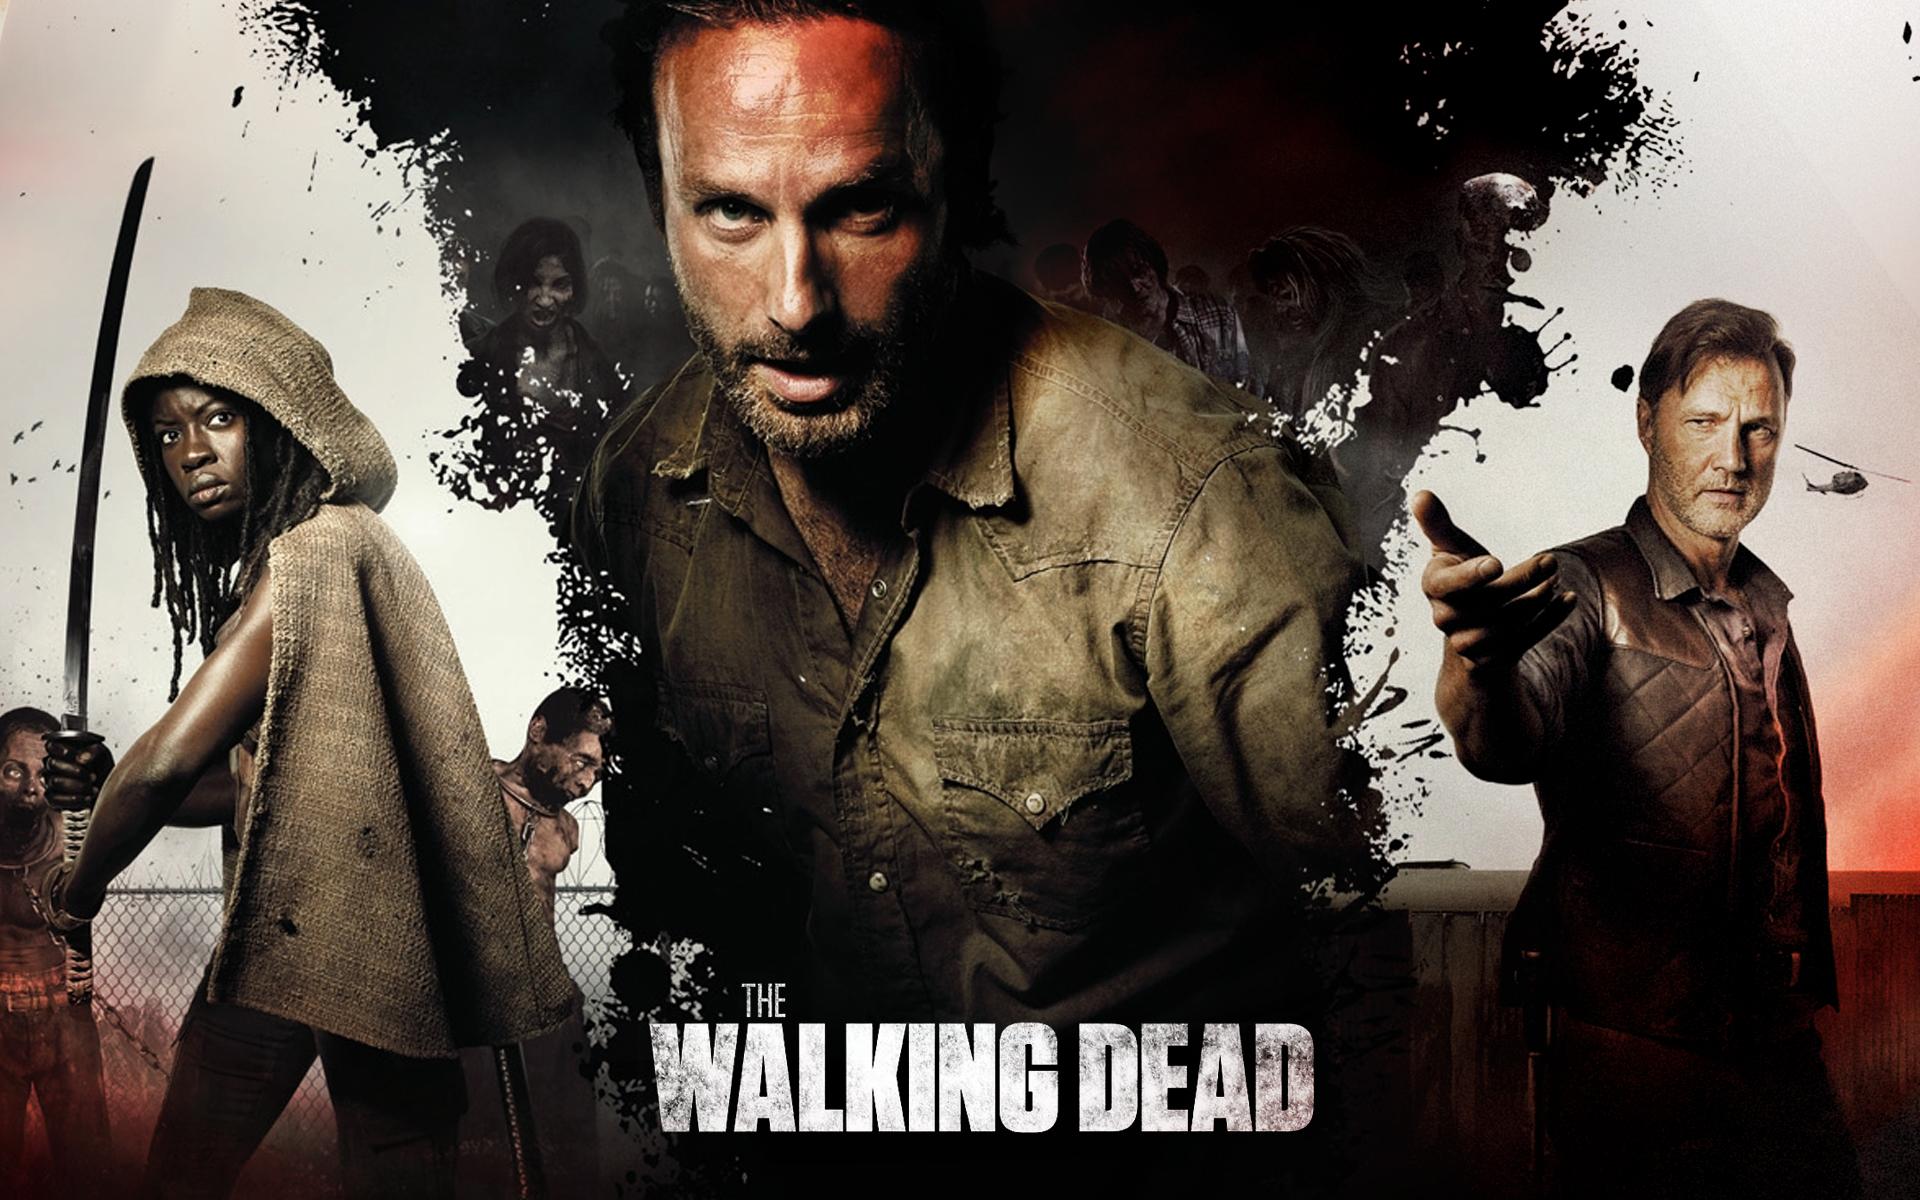 the walking dead wallpaper,movie,poster,action film,machete,fictional character